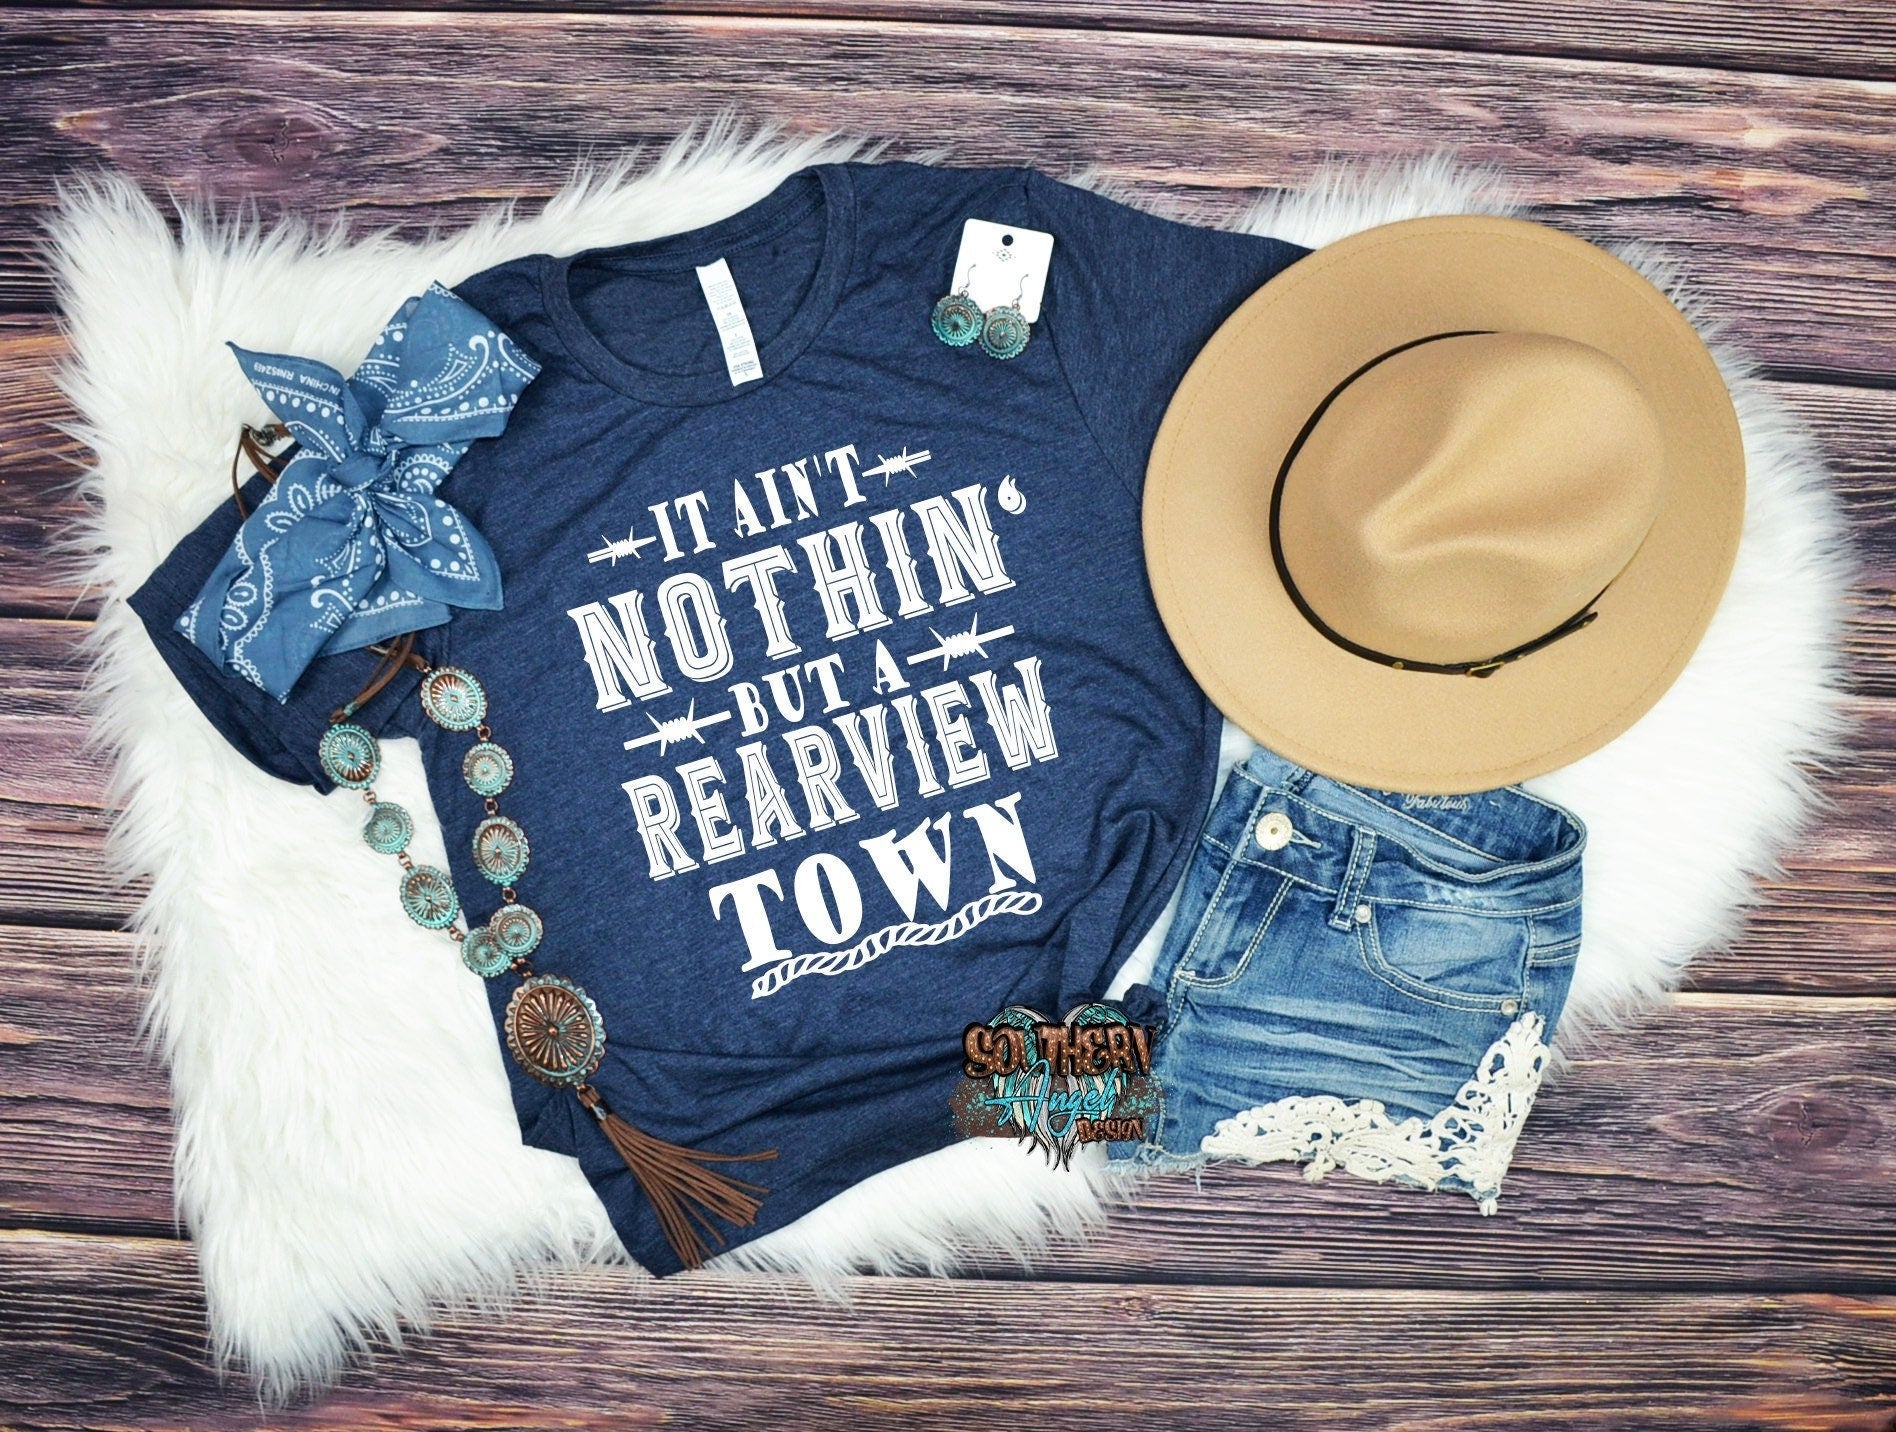 Country music shirt, Country song shirt, Southern girl shirt, Country saying, Music festival shirt, Country graphic tee, Rodeo shirt